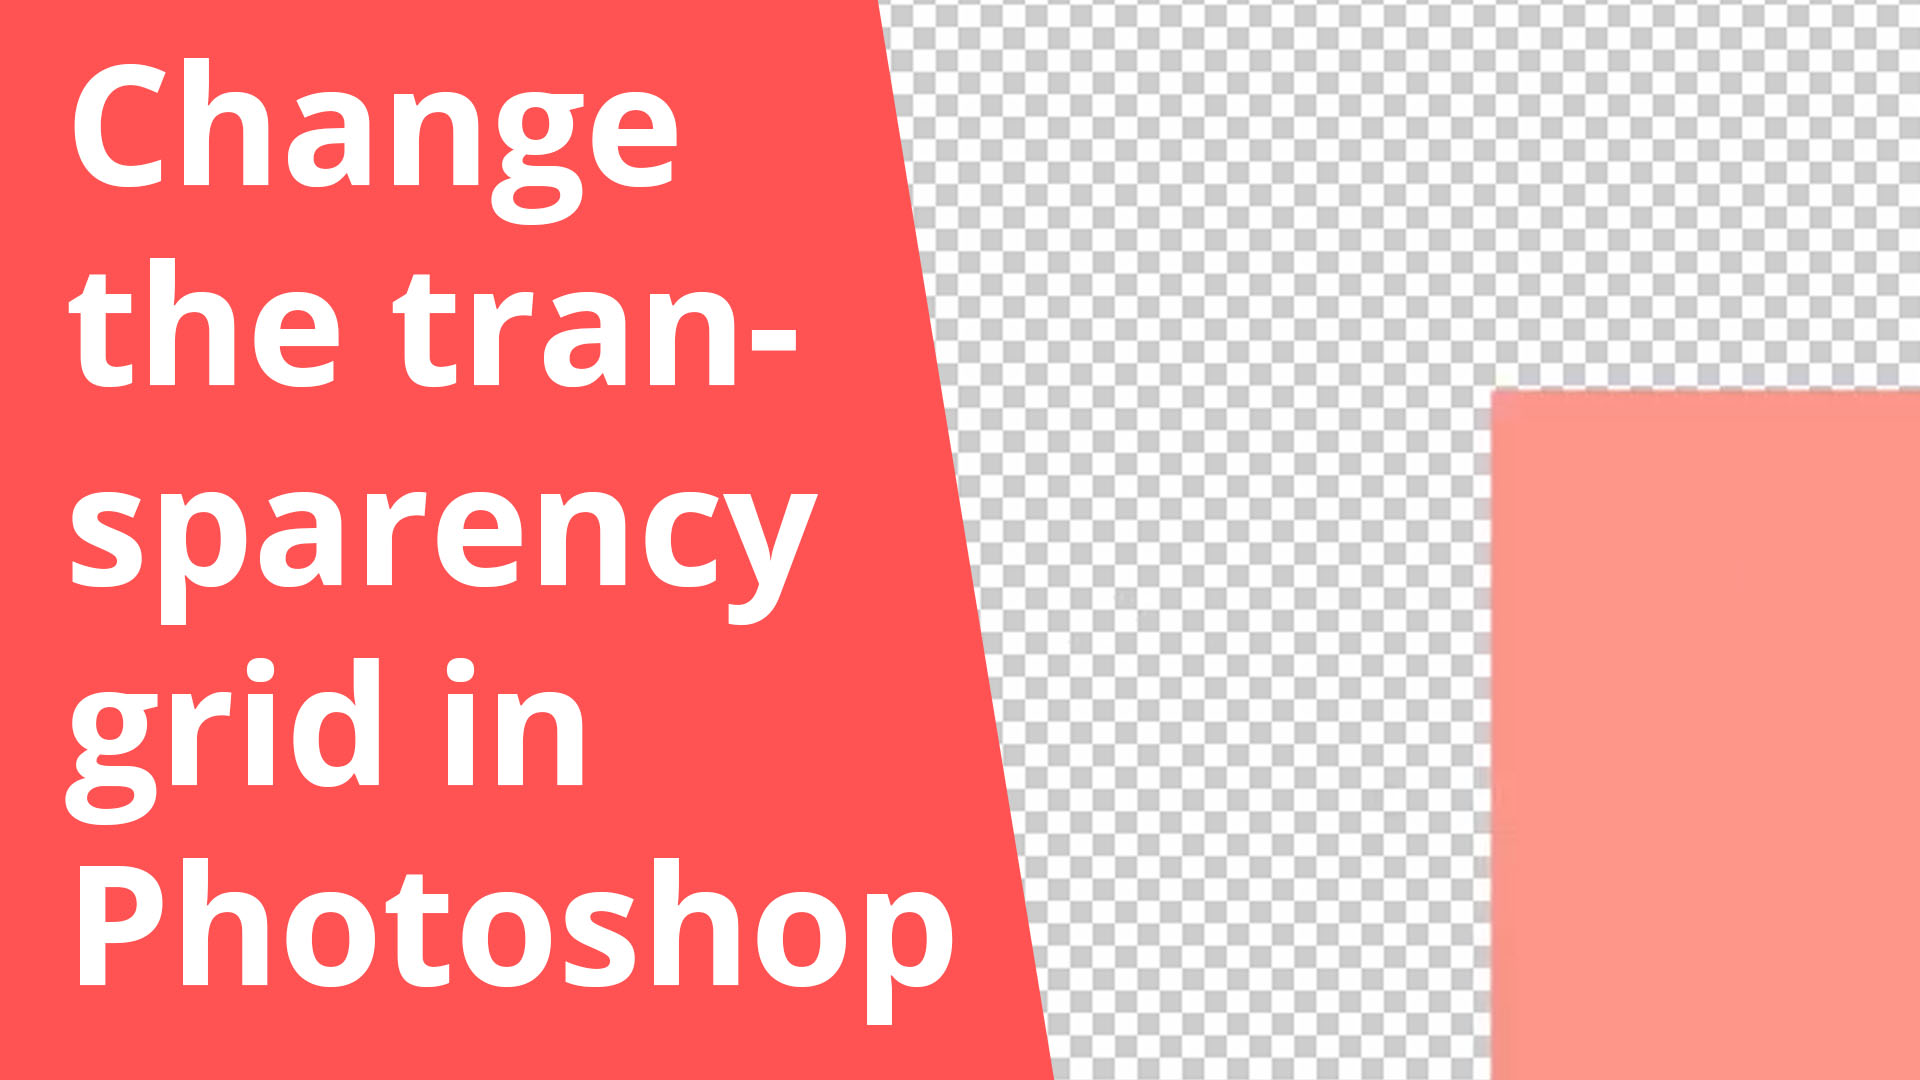 Change the color of the transparency grid in Photoshop